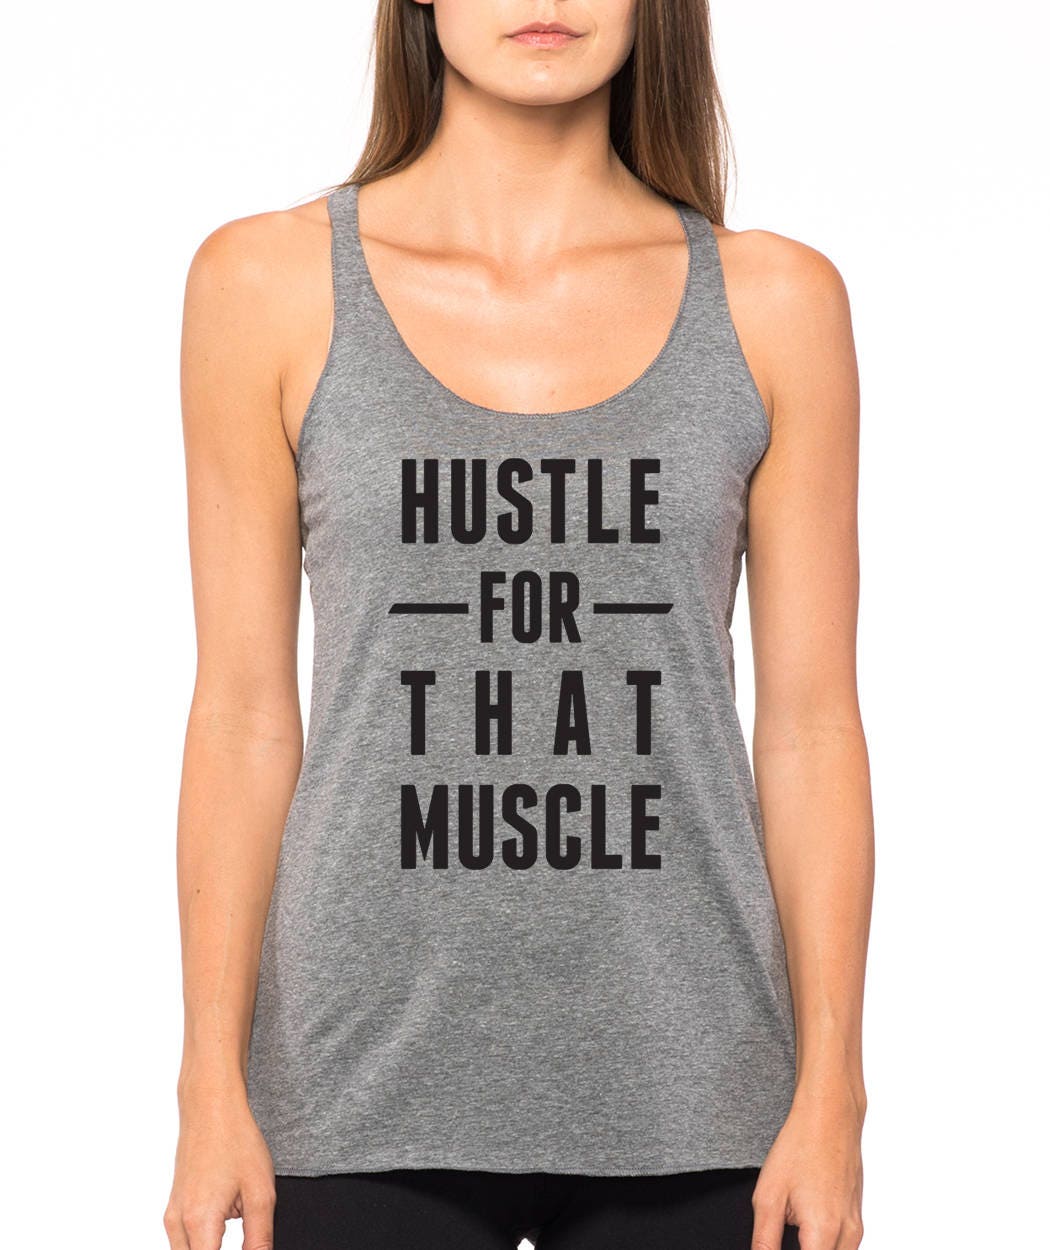 Hustle for the Muscle Womens Workout Tank Gym Shirt Workout Shirt